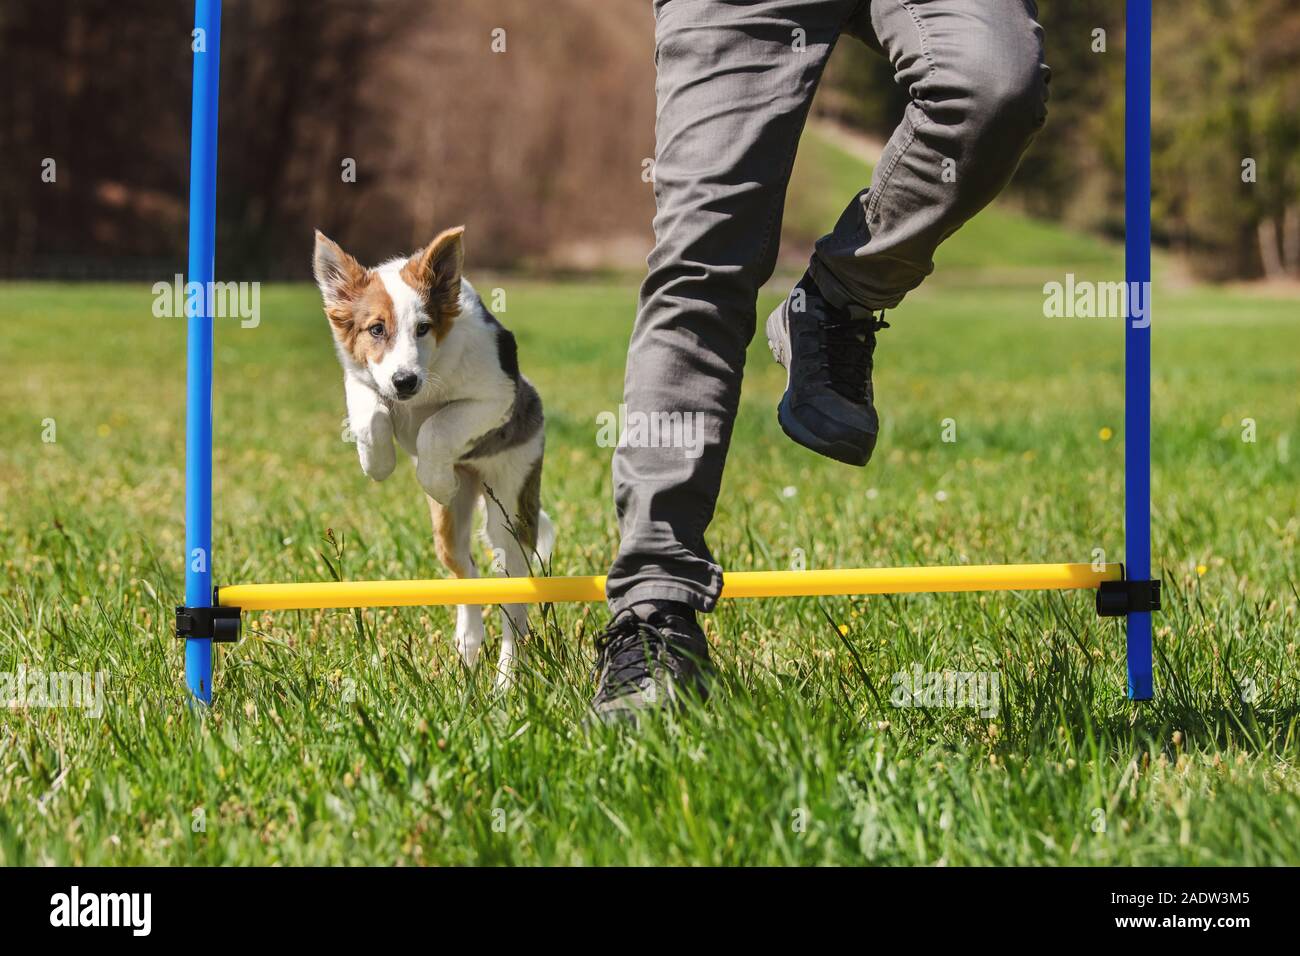 Agility Dog sport training with a puppy dog, man and whelp jumping over hurdles Stock Photo